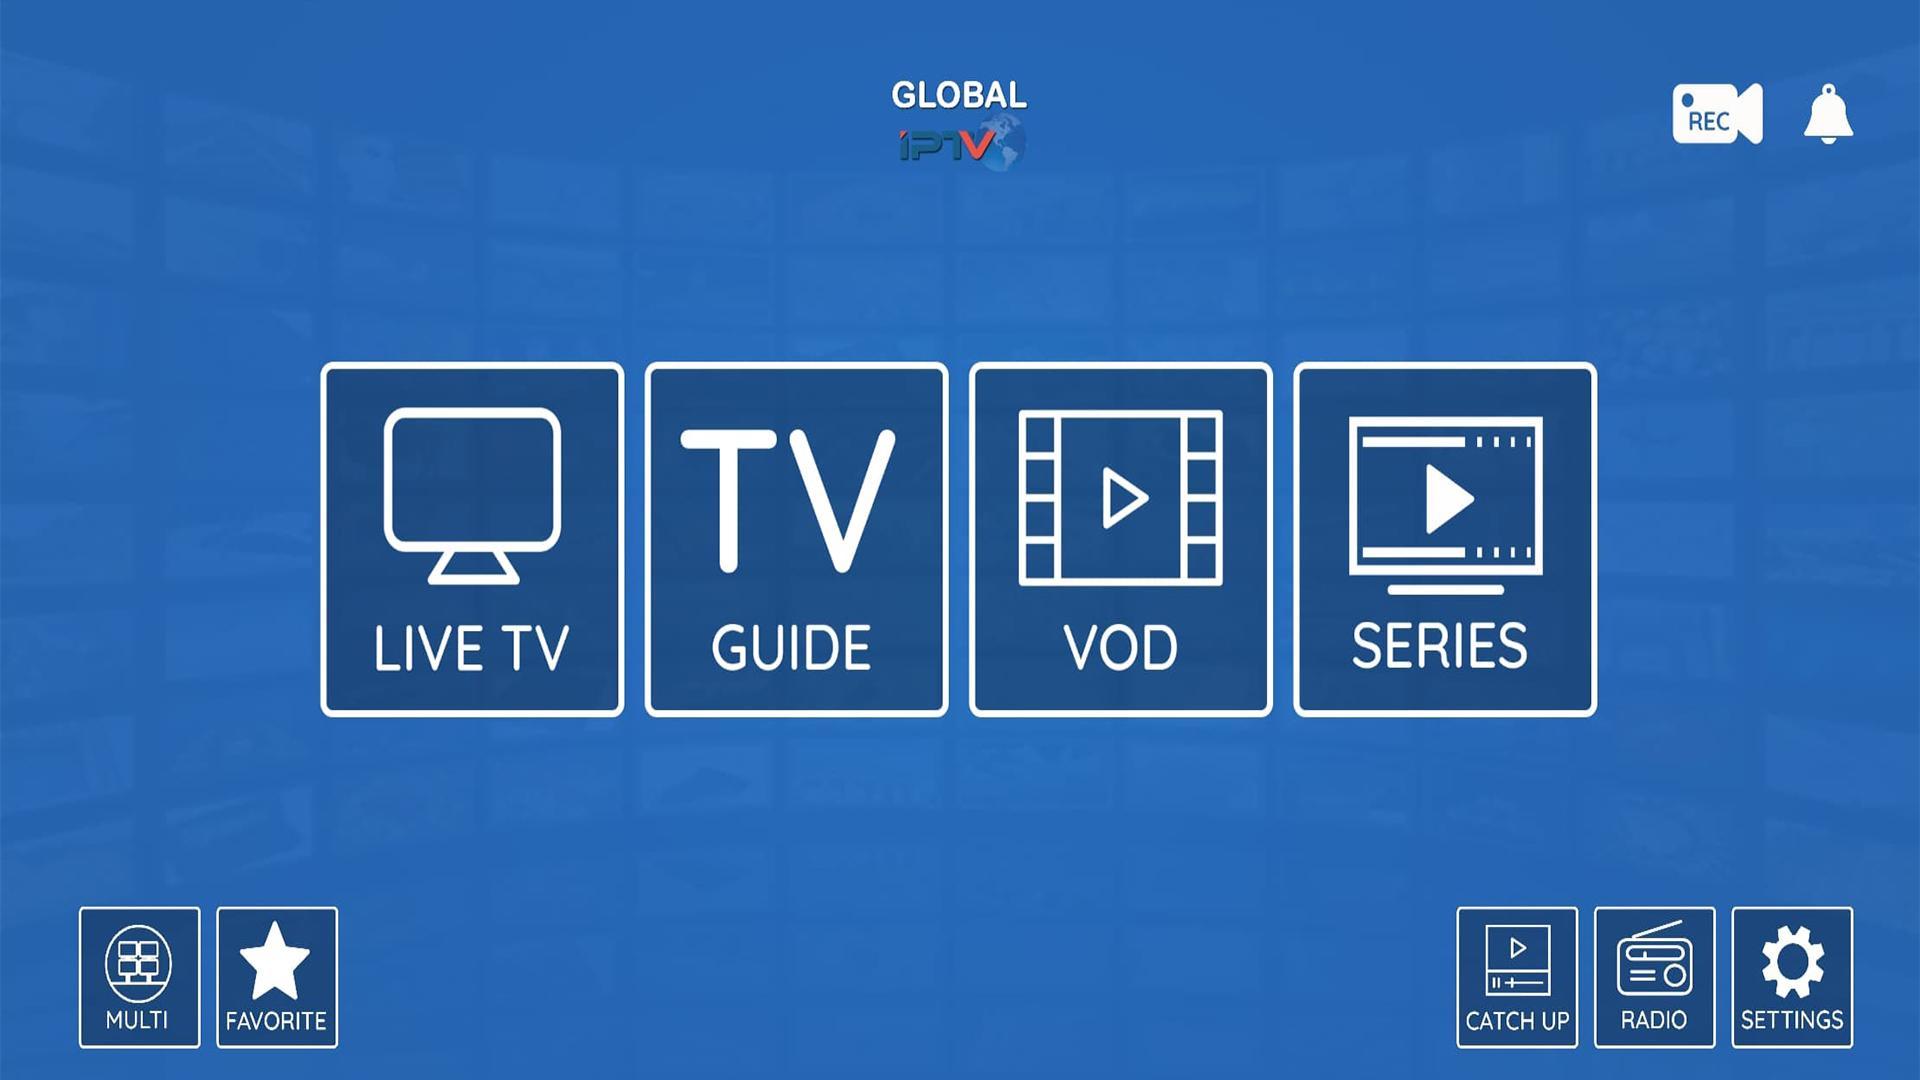 Global TV for Android - APK Download